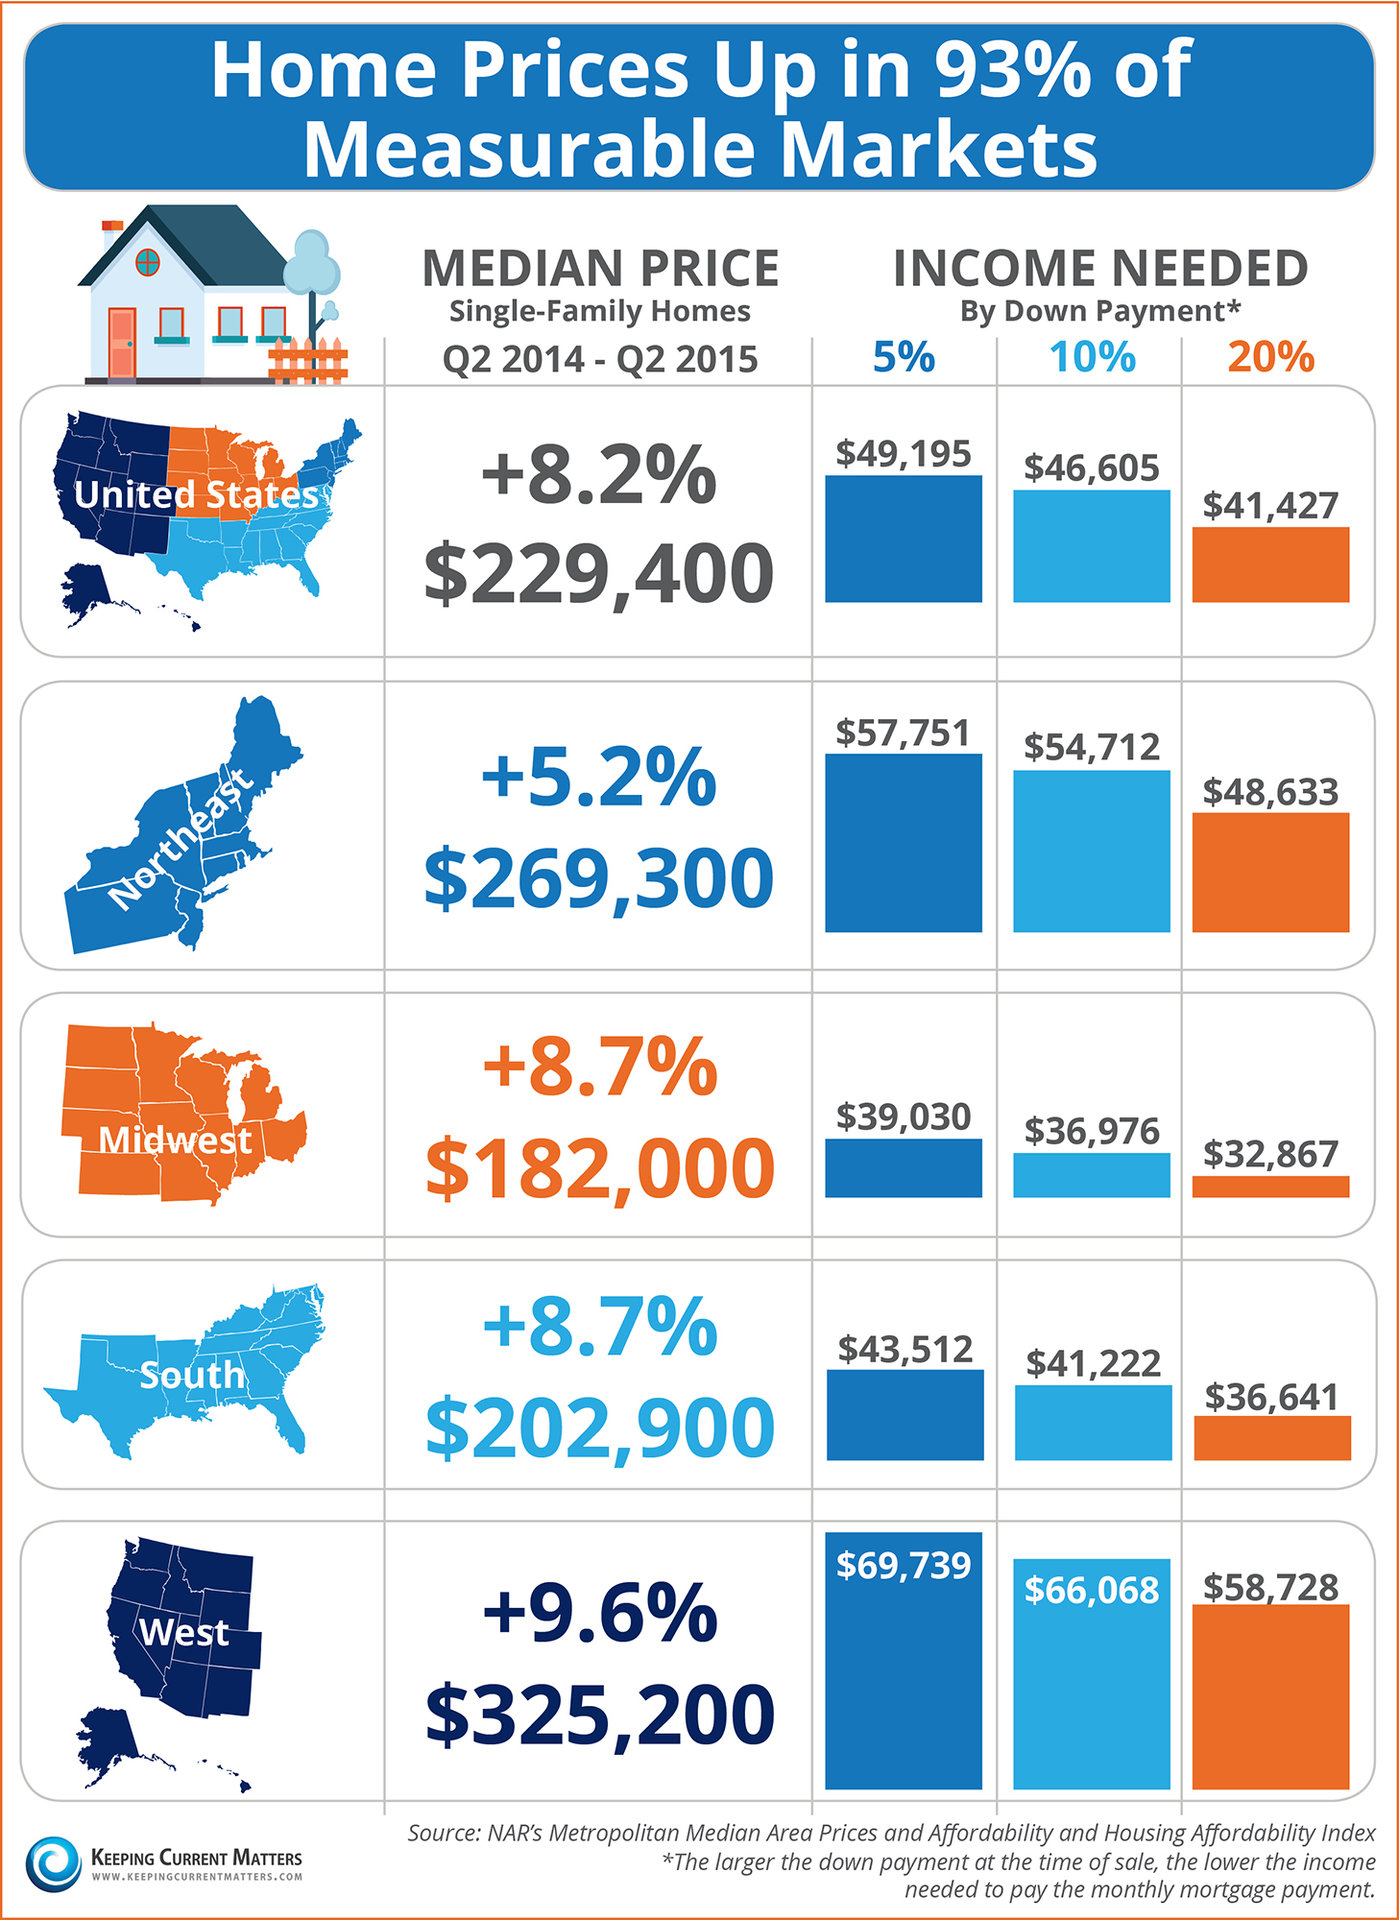 Home Prices Up in 93% of Measurable Markets [INFOGRAPHIC] | Keeping Current Matters